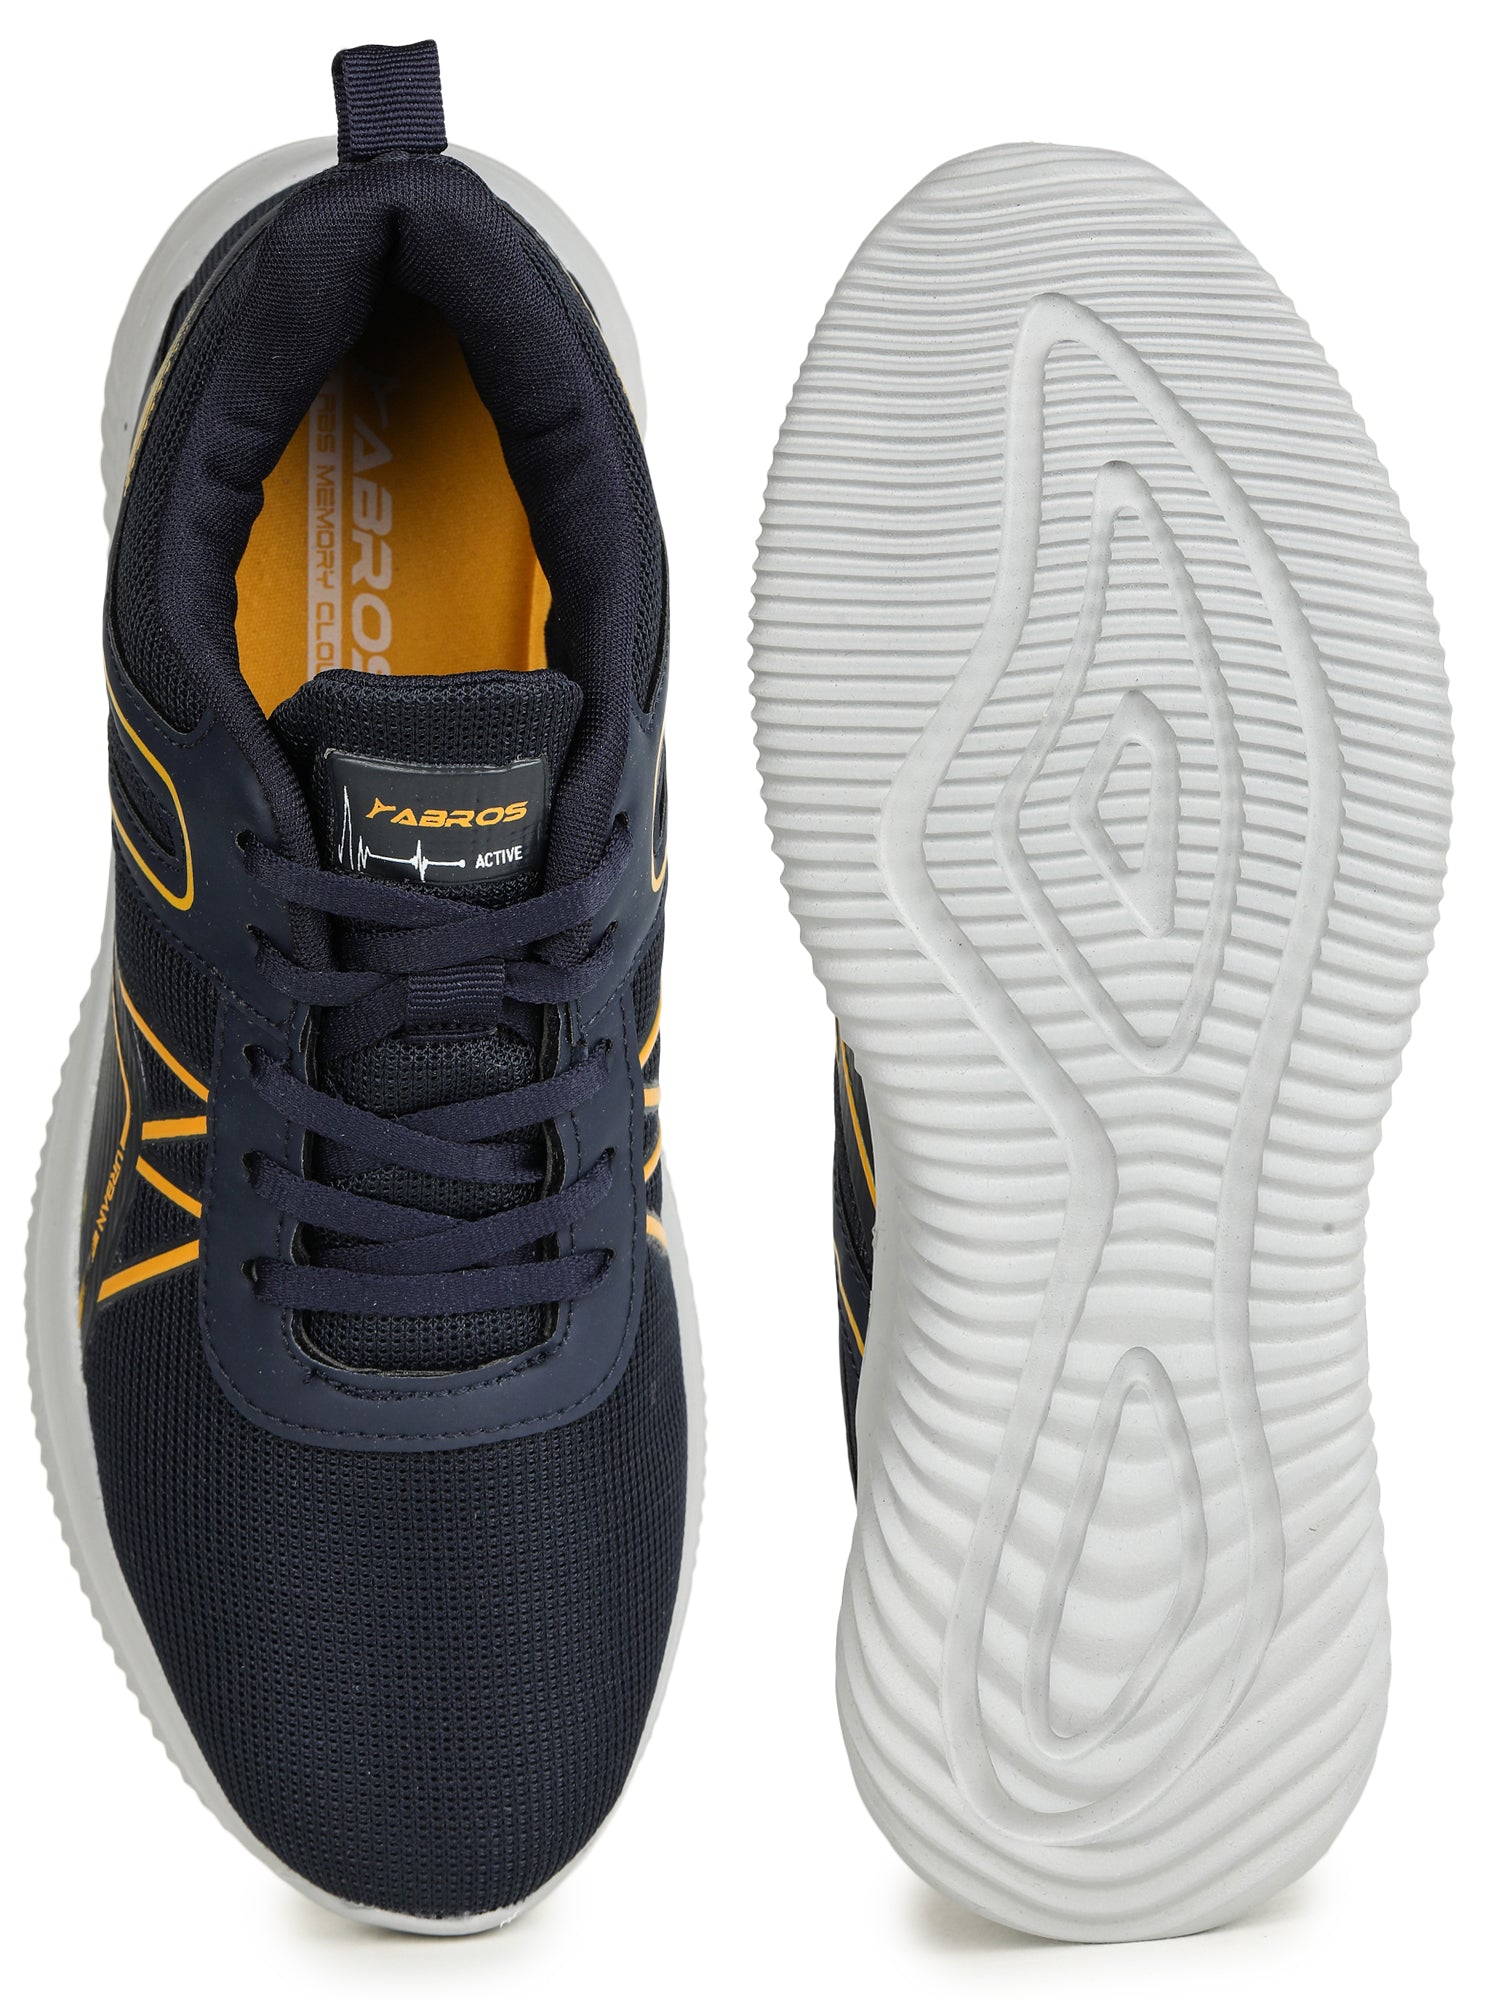 SMITH-M RUNNING SPORTS SHOES FOR MEN